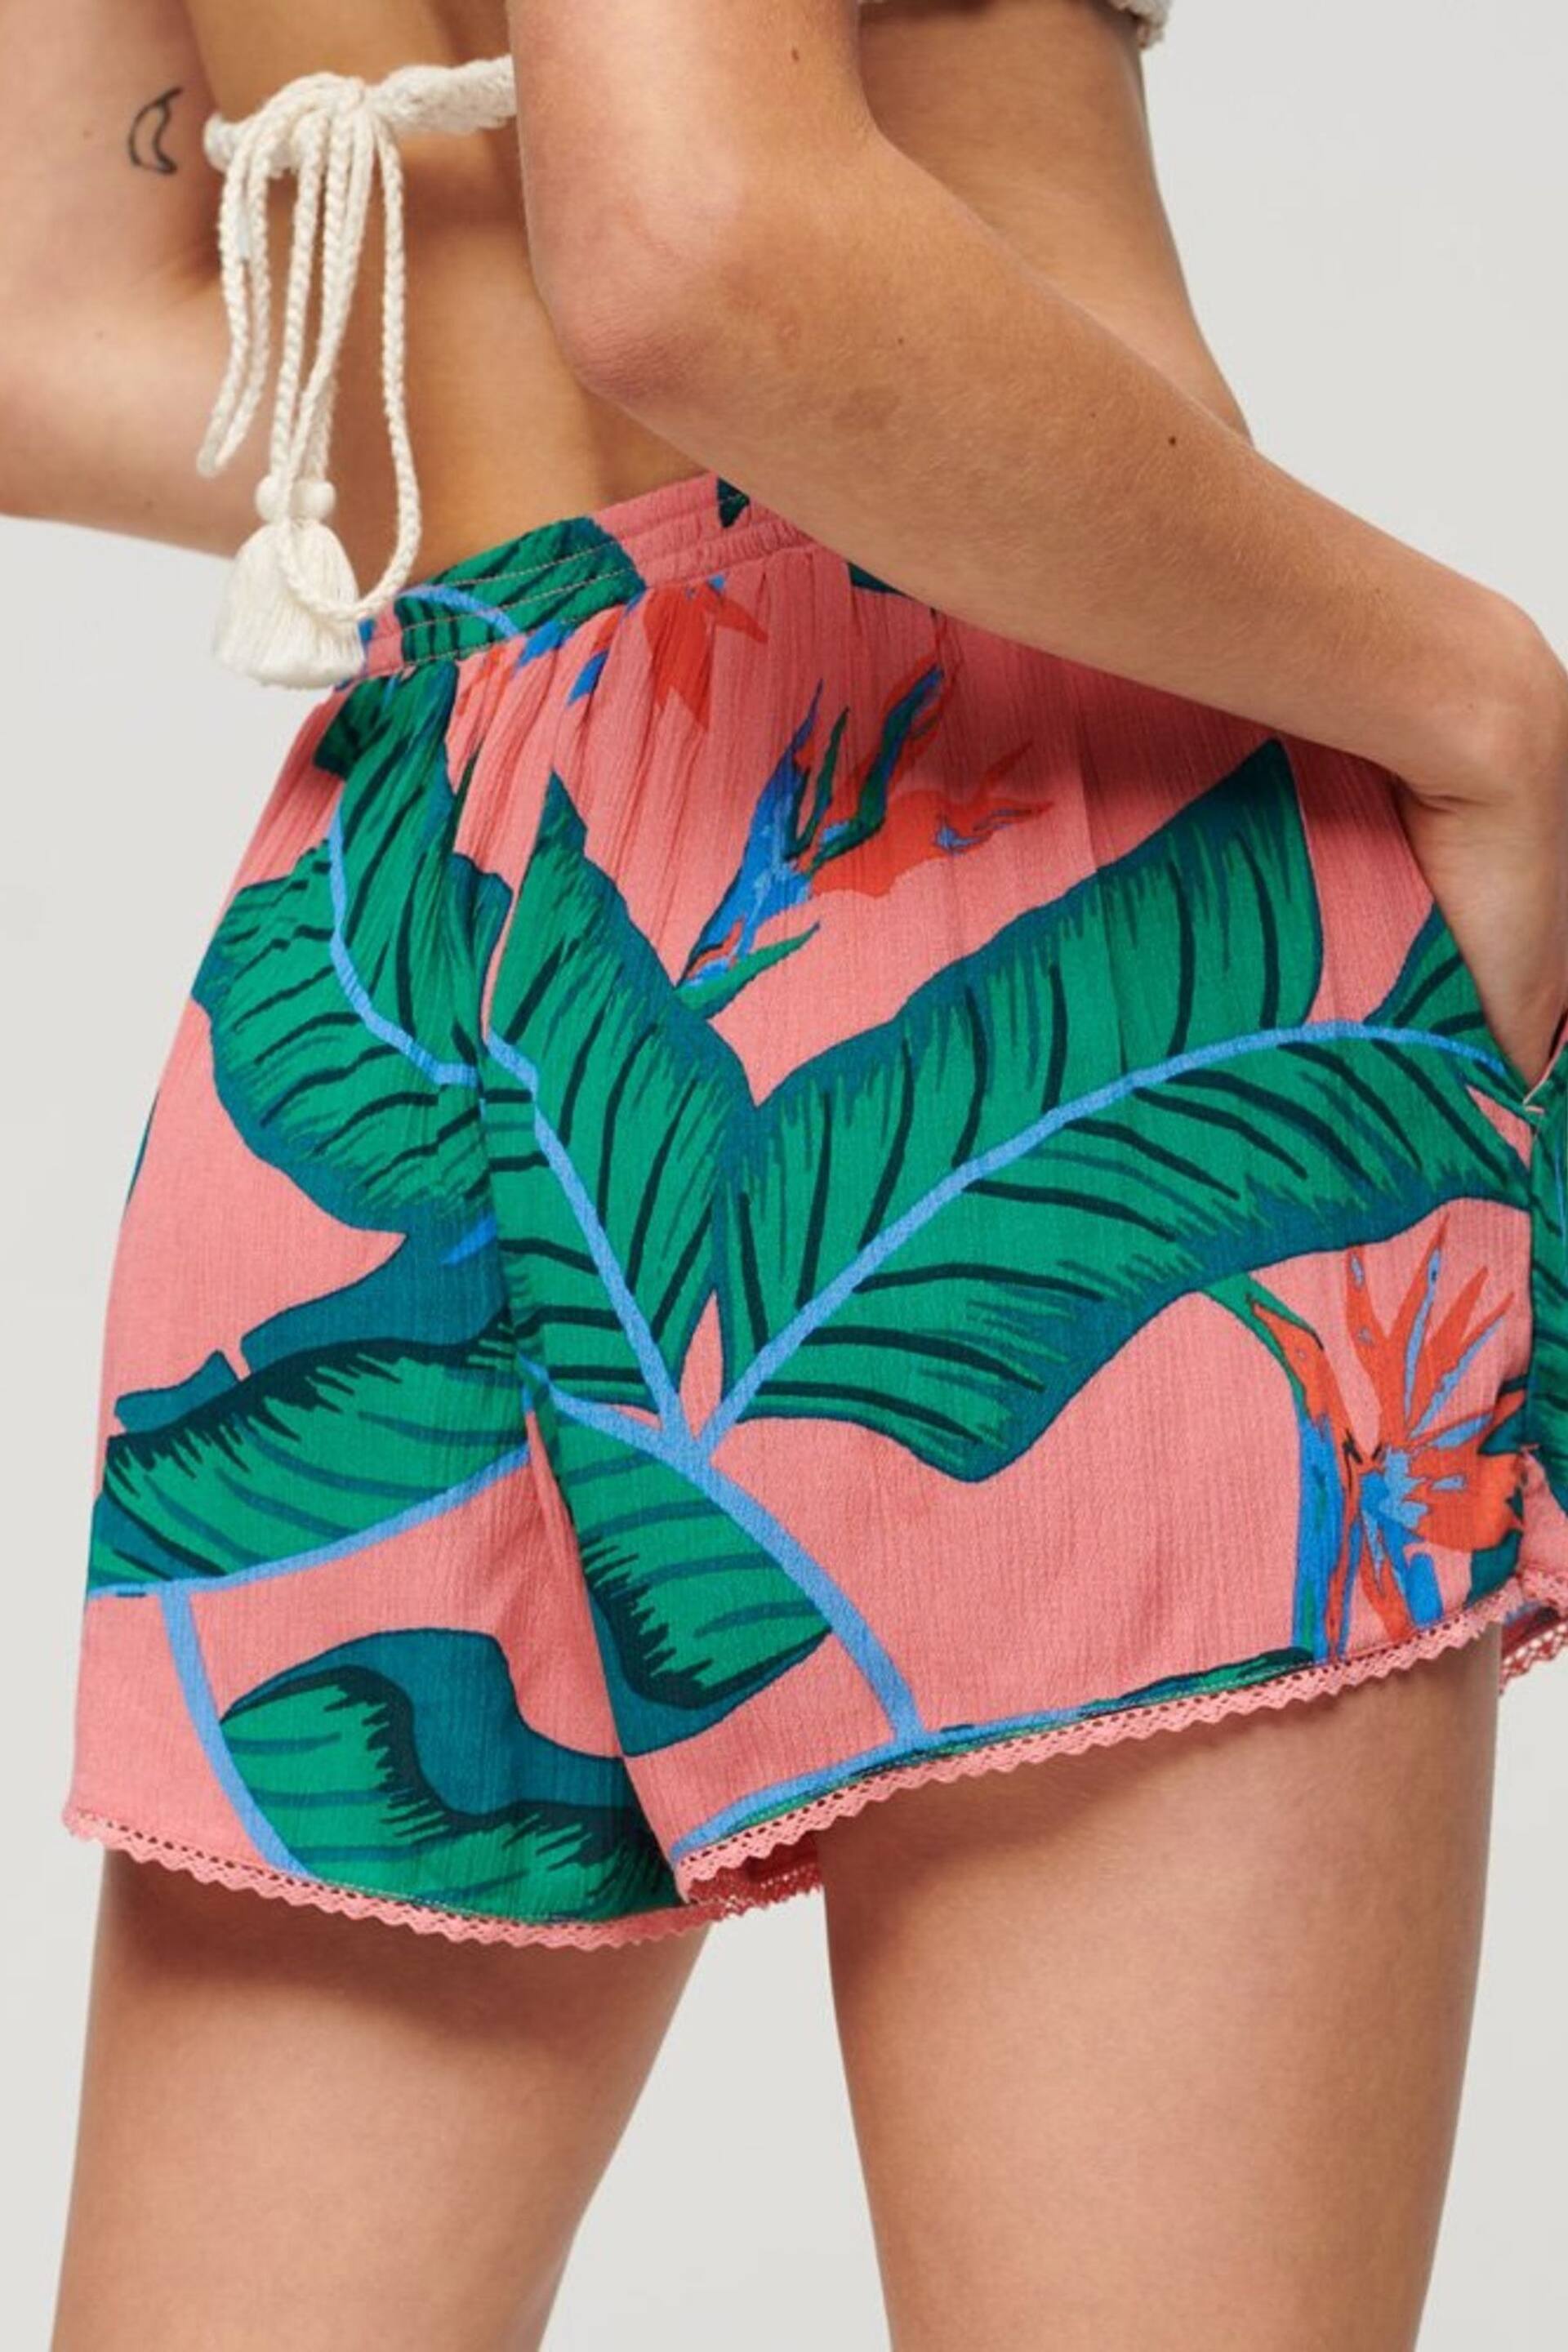 Superdry Pink Beach Shorts - Image 2 of 7